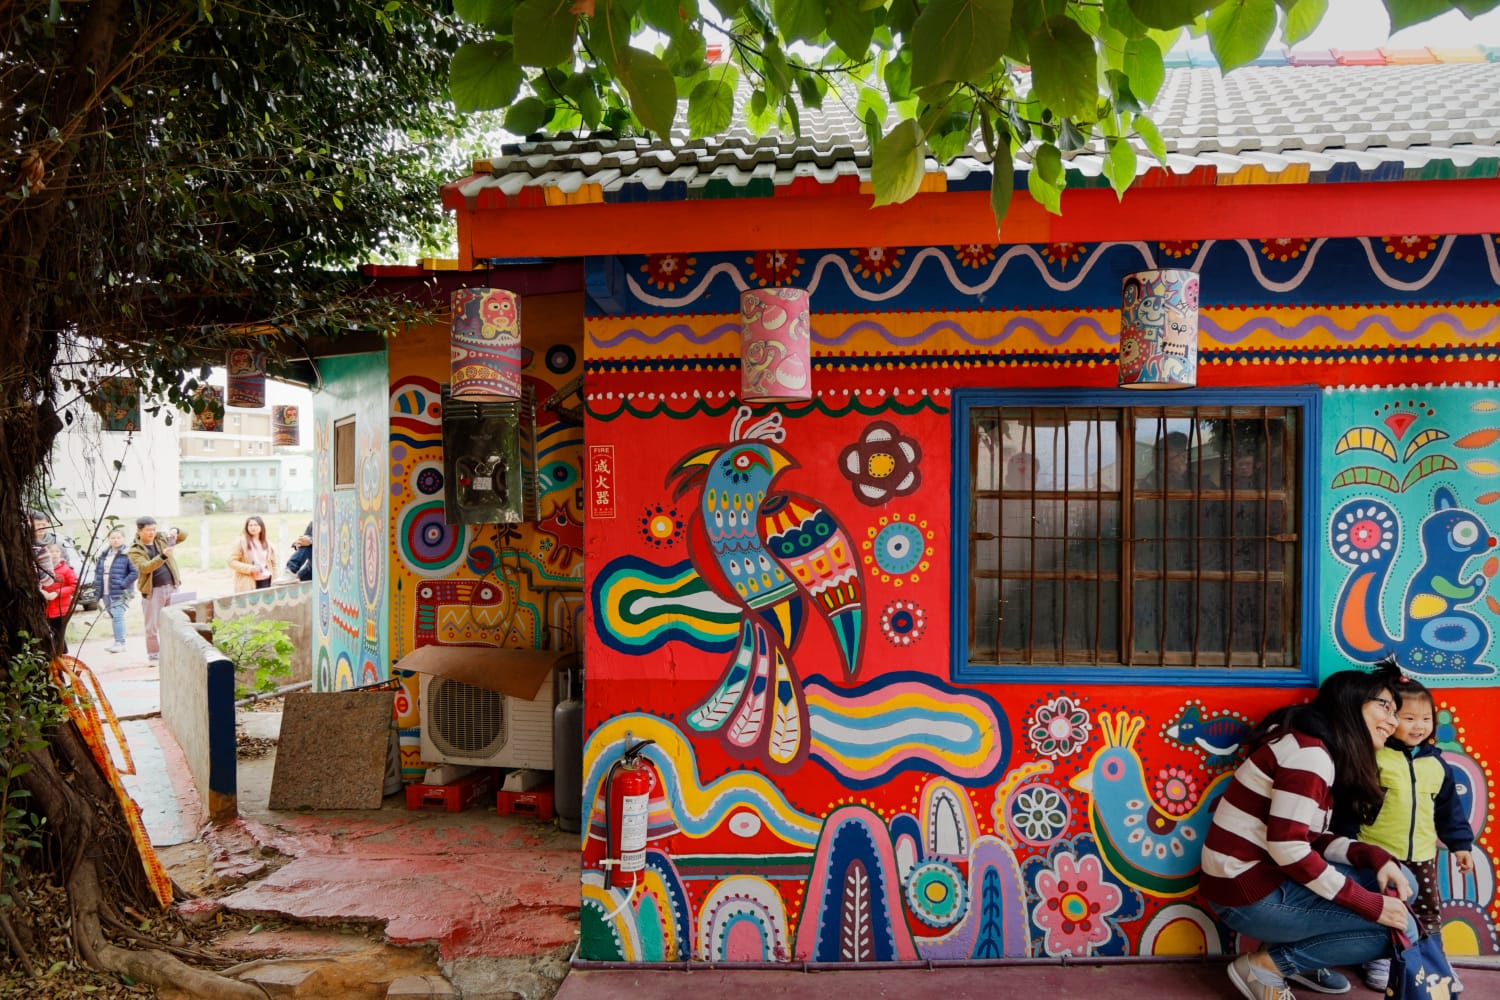 A mother and daughter pose for photos outside a brightly-painted house in Rainbow Village, Taichung, Taiwan.